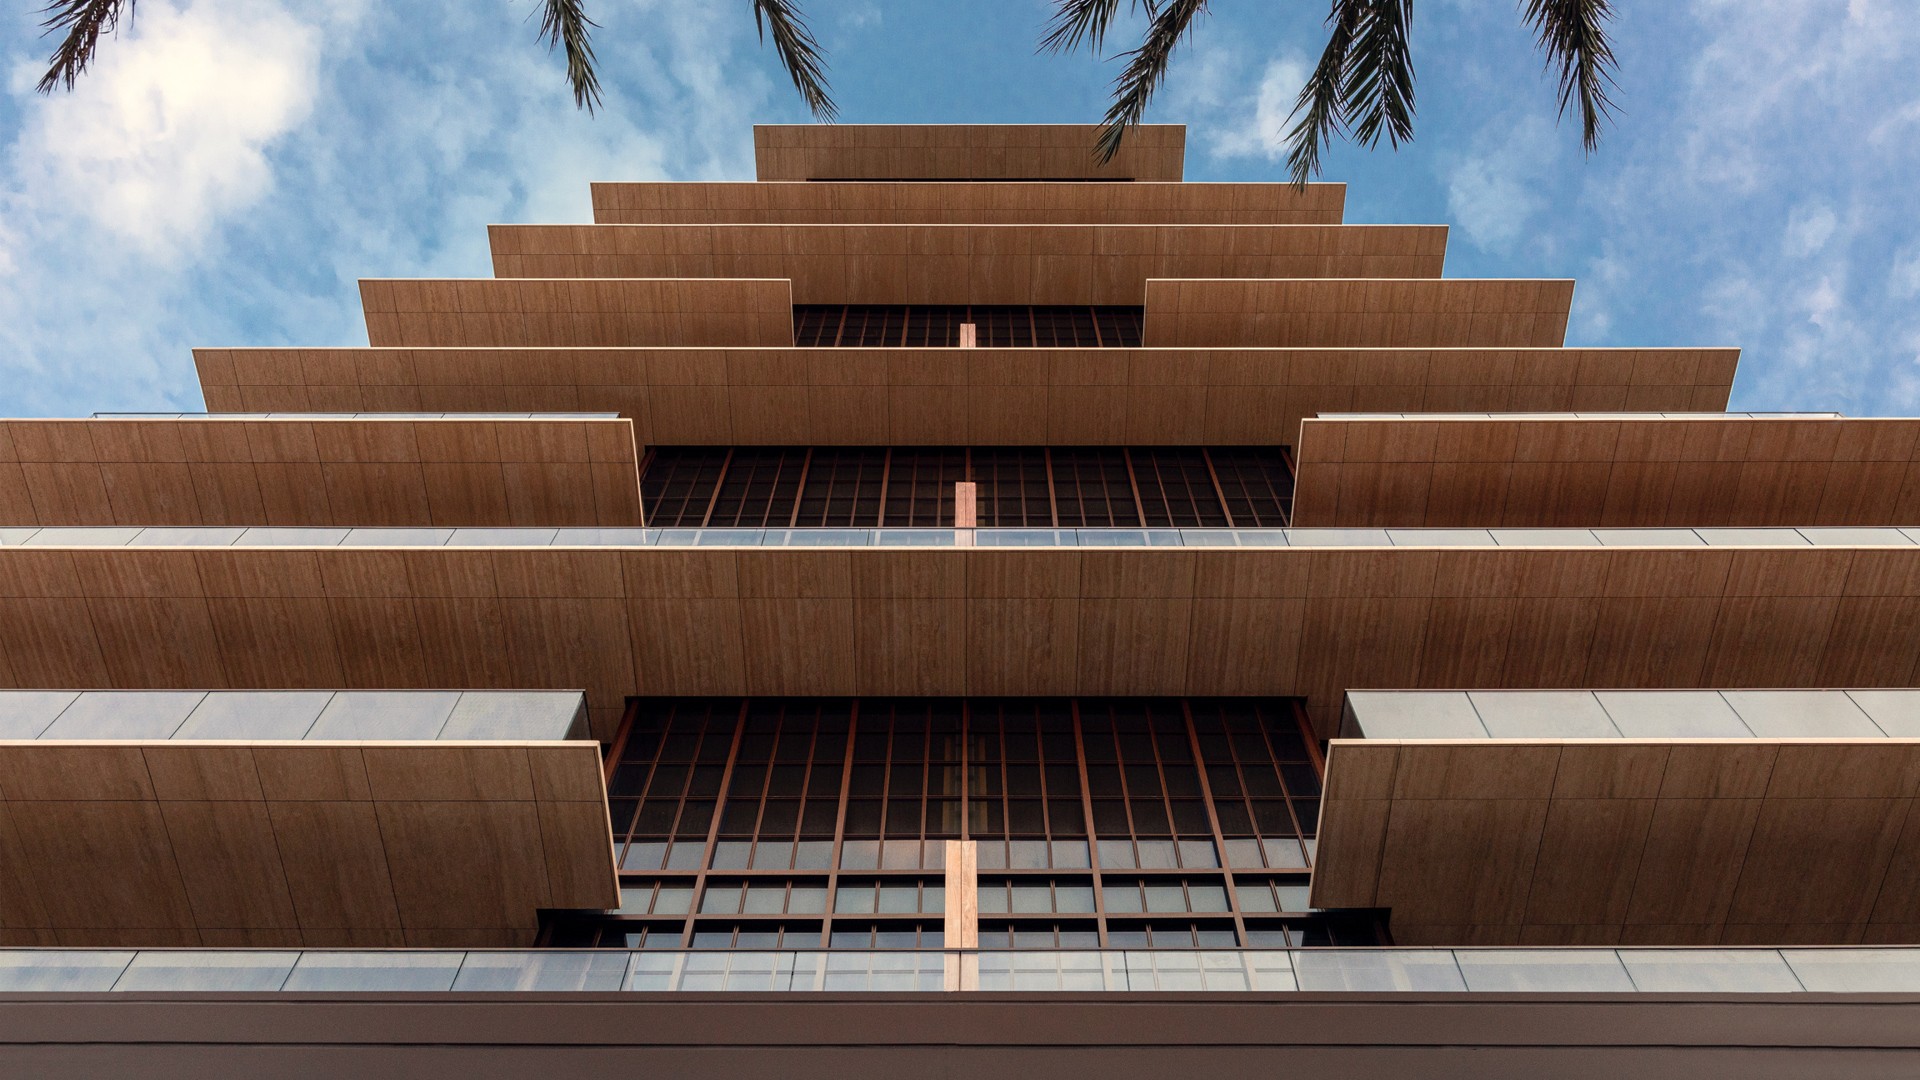 Arte Surfside is a modern-day pagoda on Miami’s oceanfront